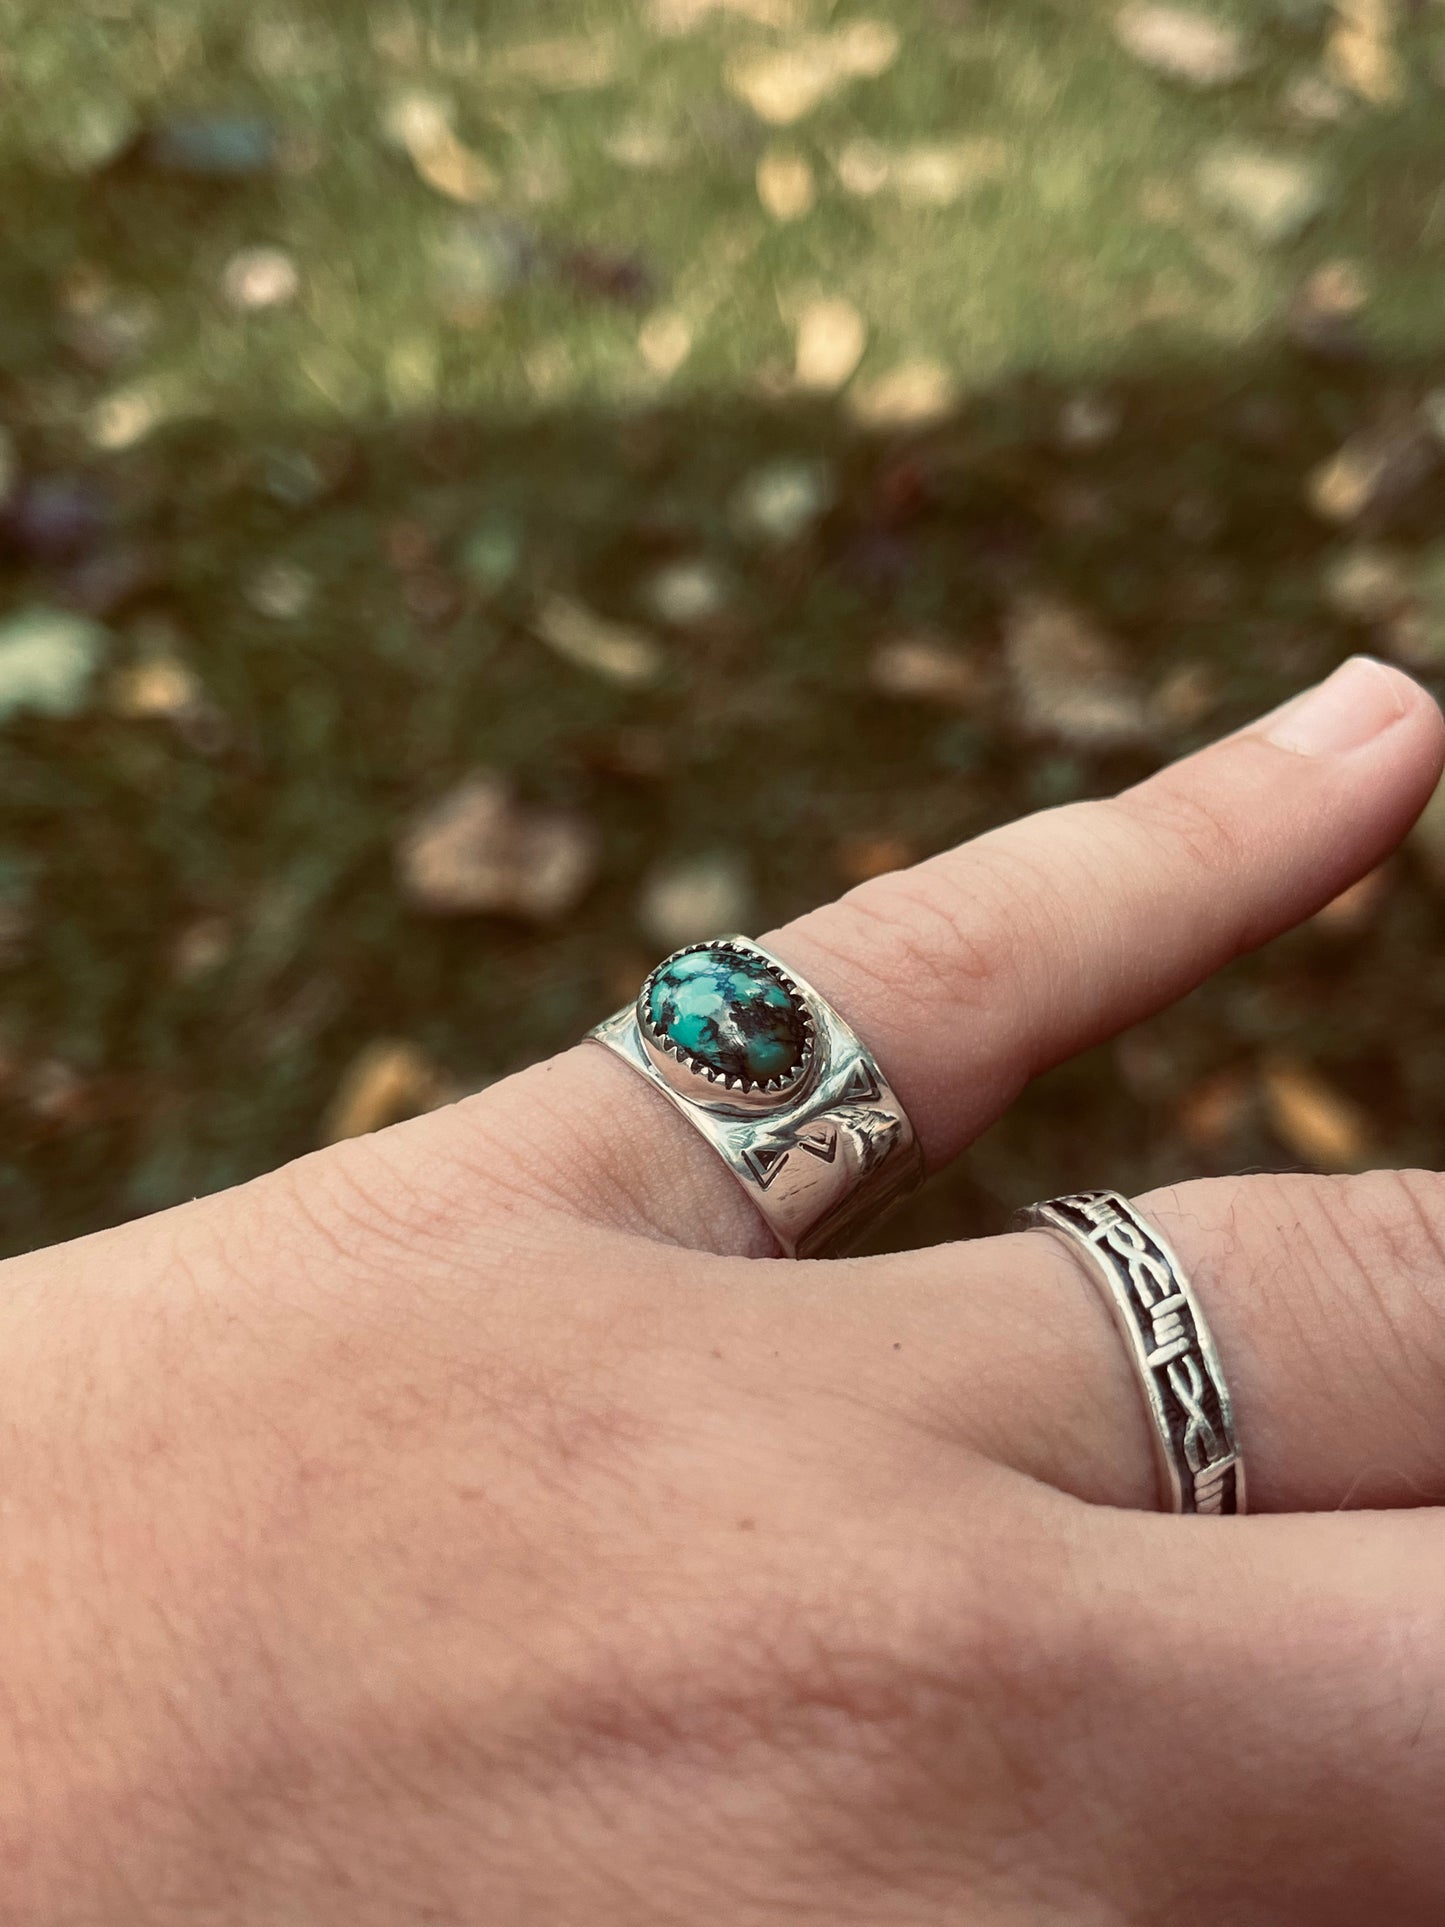 Turquoise Ring -925 Sterling Silver - Handmade/Made To Order